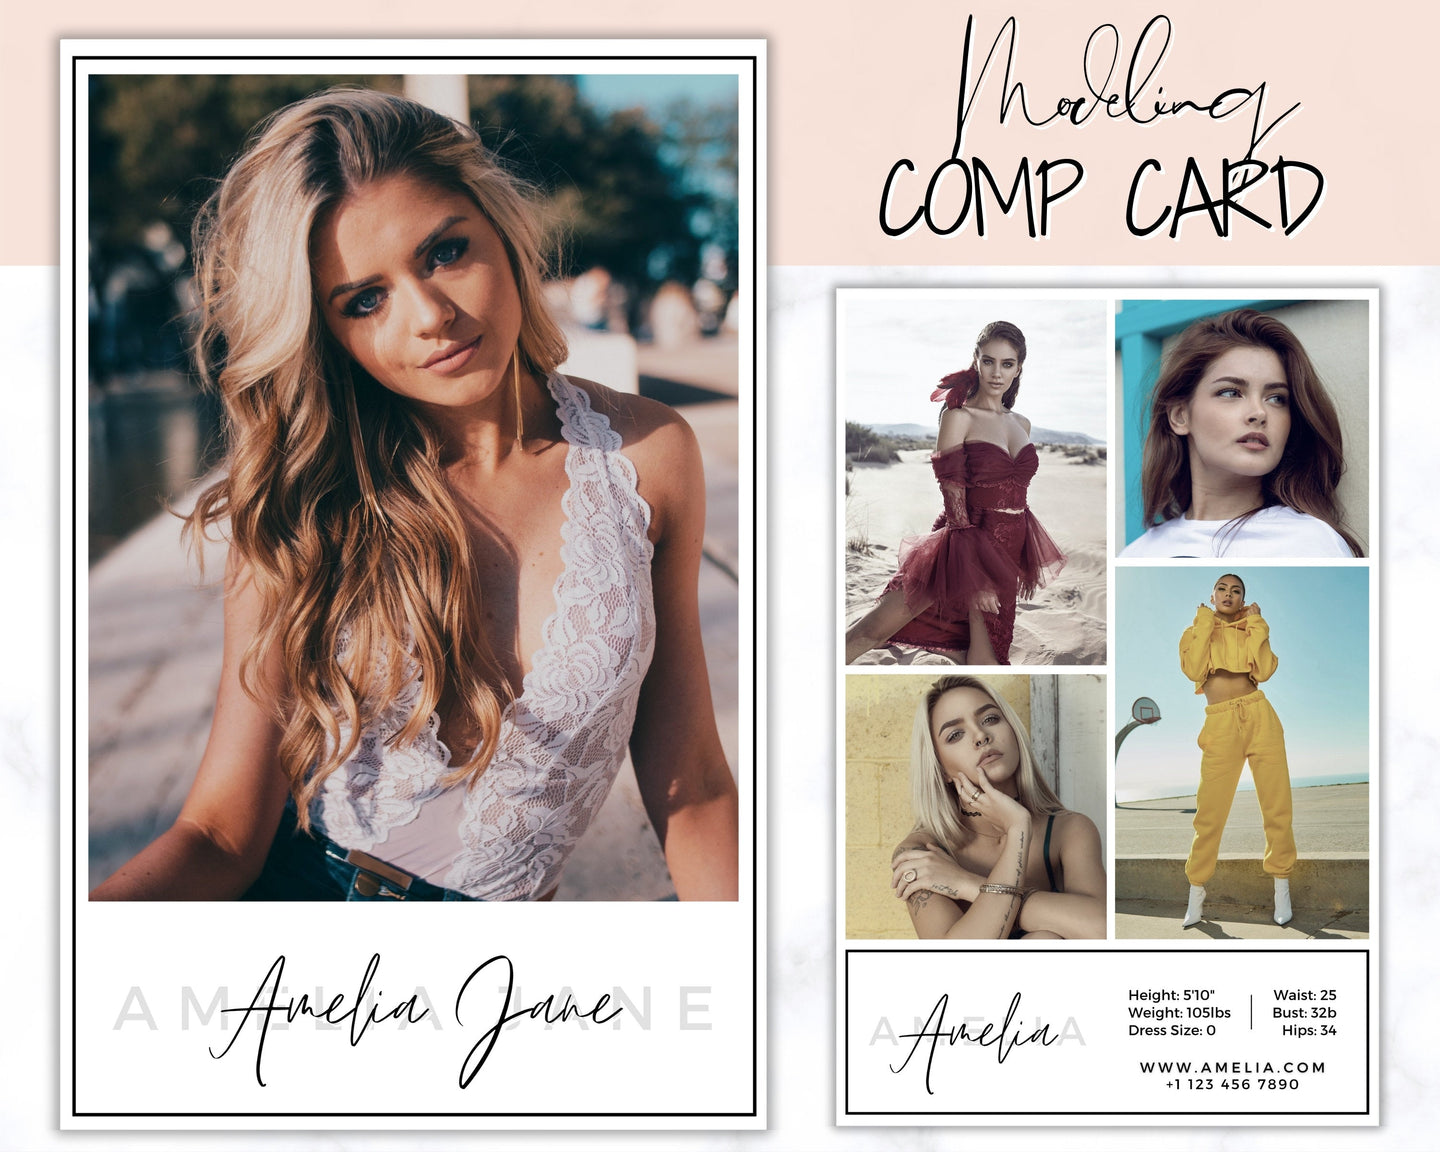 COMP CARD Template. Modeling Photocard! Zed Card for Models. Z Card. Fashion Resume Photo Card. Modeling Compcard Editable Canva Template | Style 3